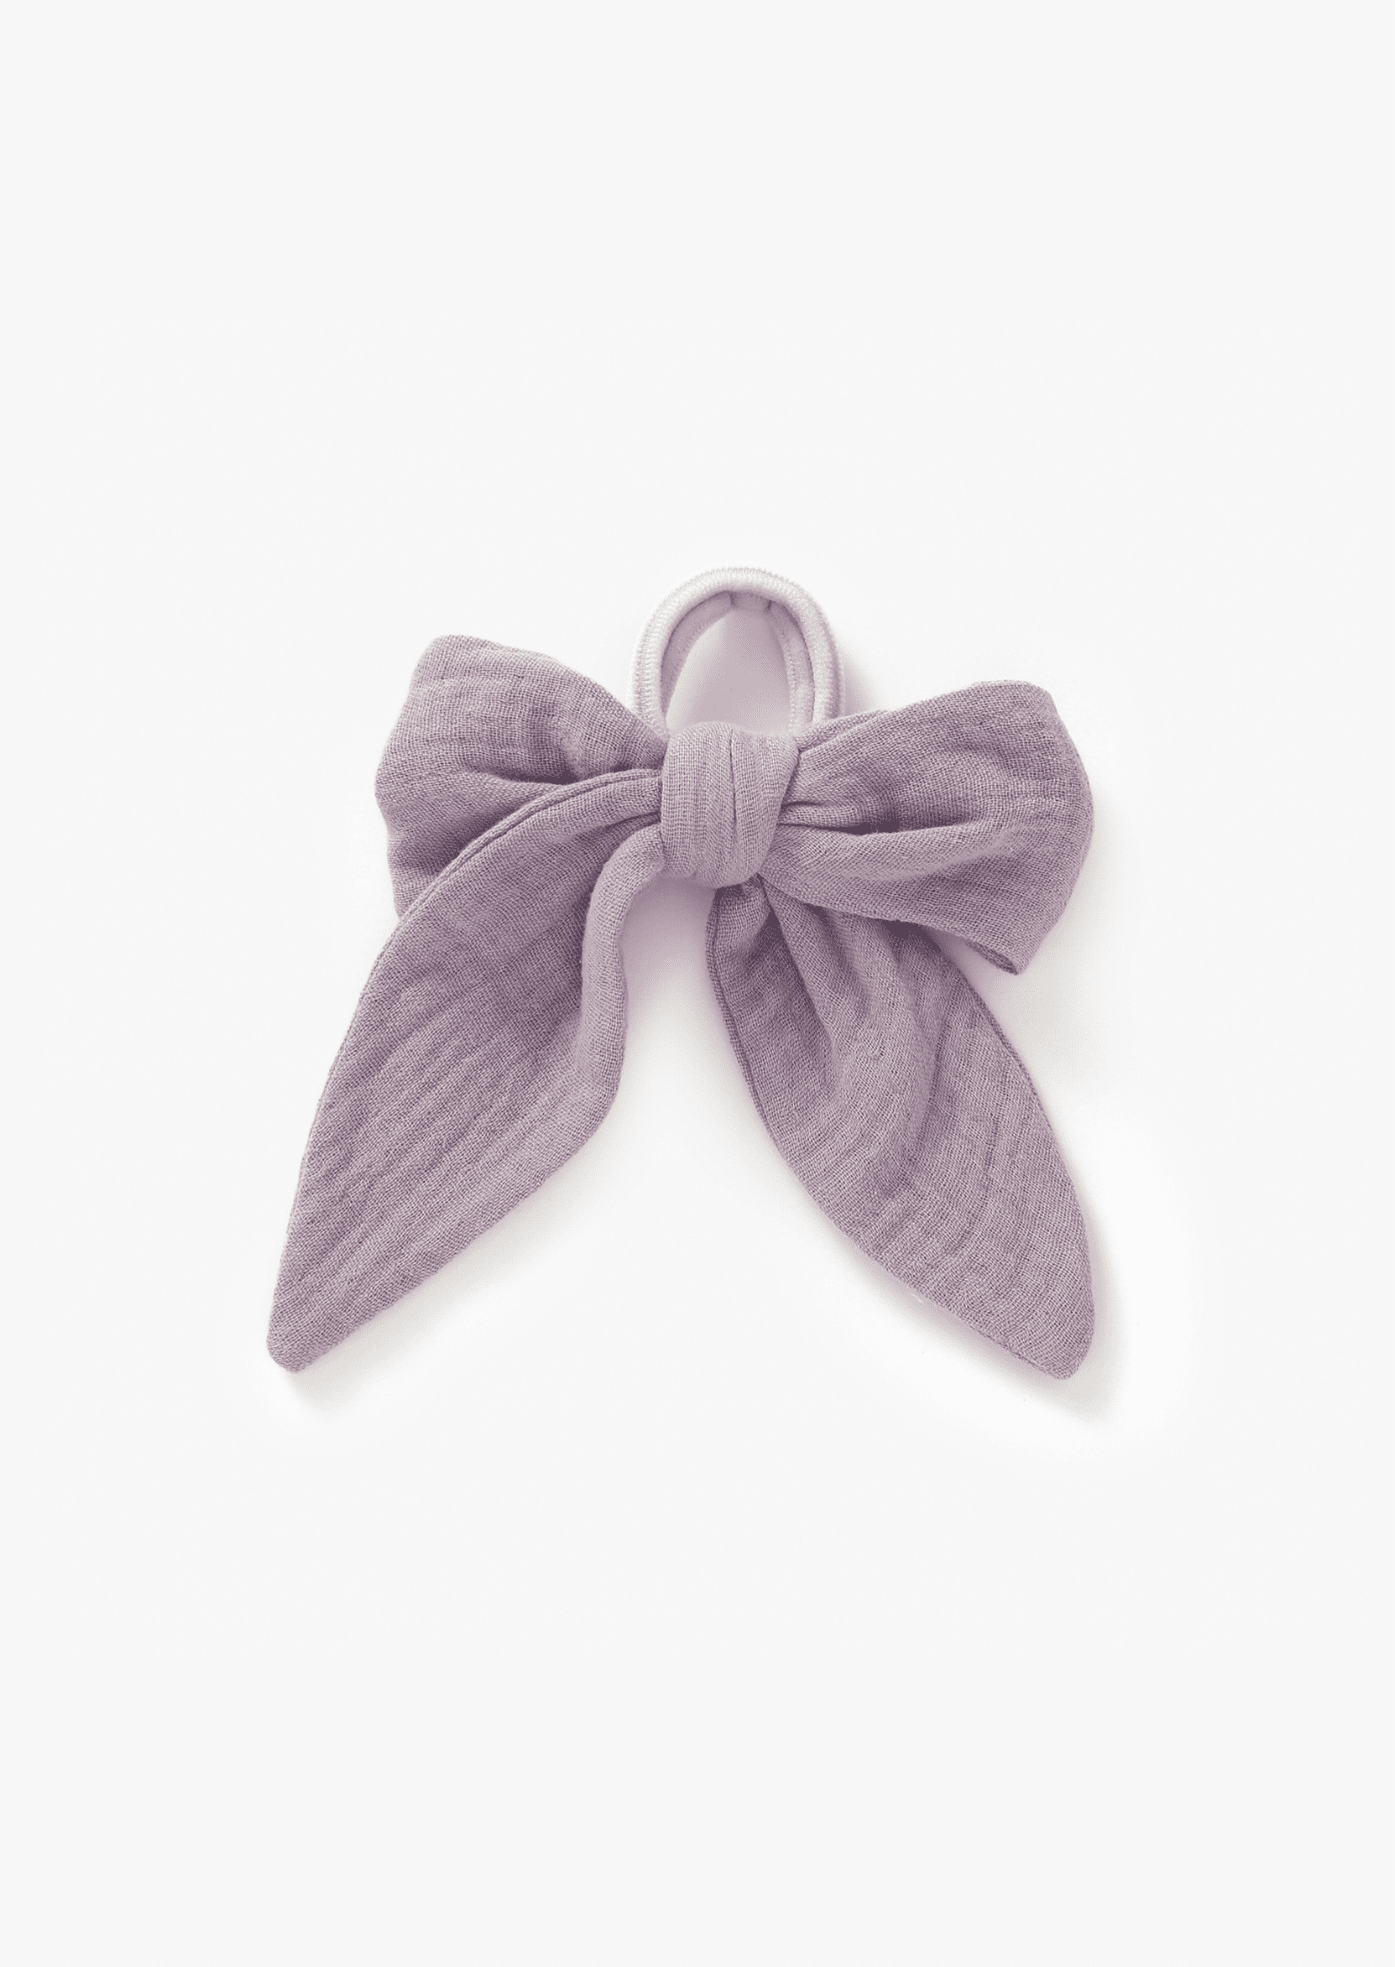 Fable Bow - Lilac - Mila & Co.